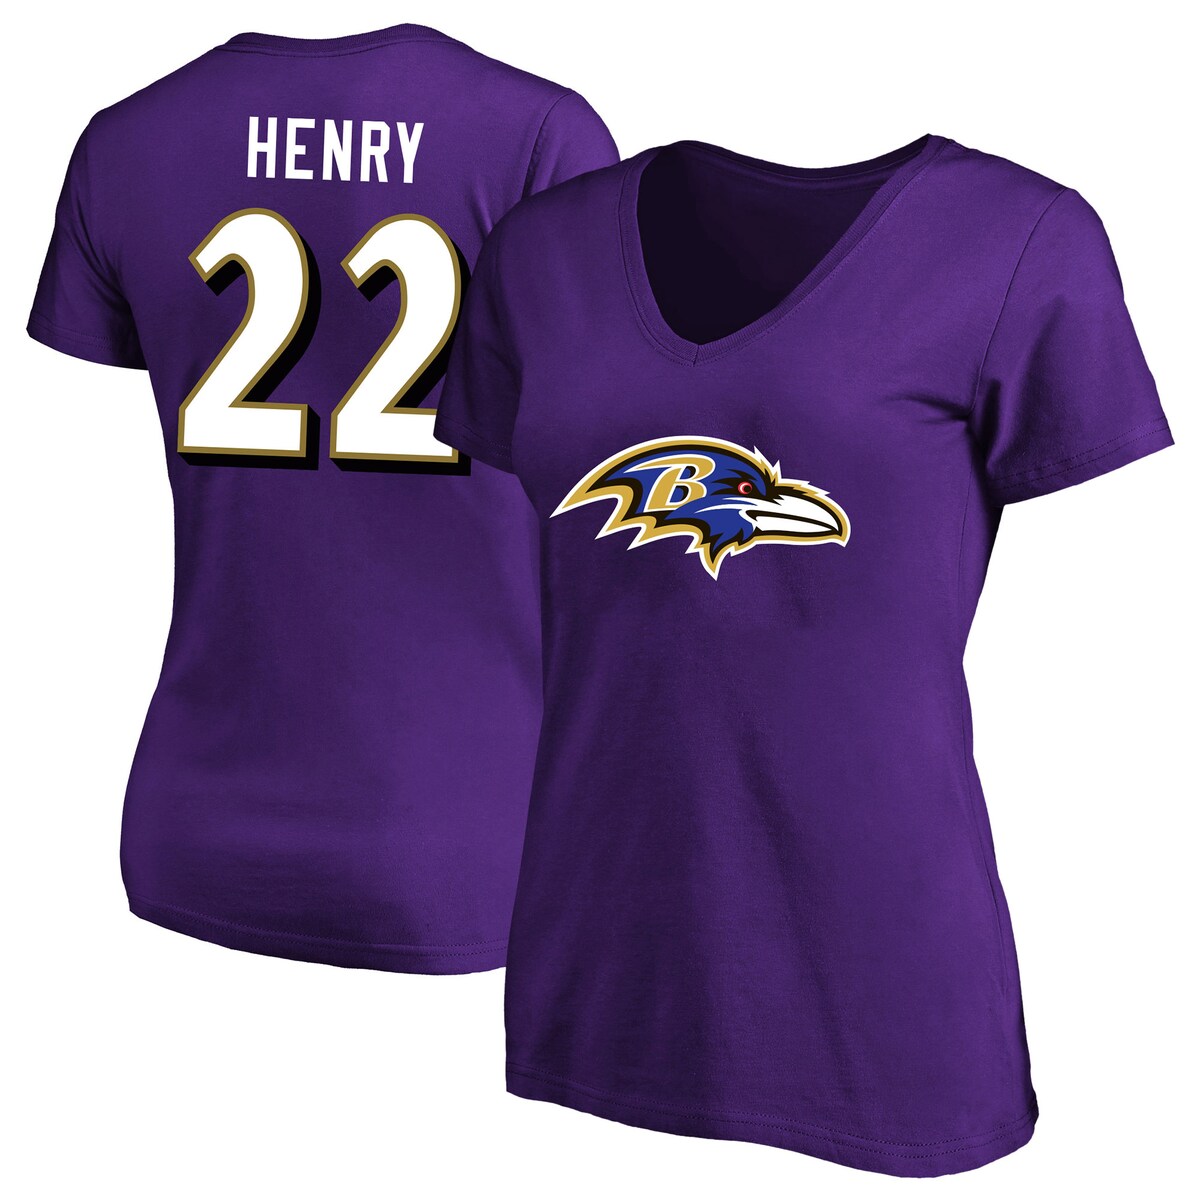 The Baltimore Ravens hit the lottery with Derrick Henry! Celebrate this crucial piece of the new Baltimore Ravens game w...